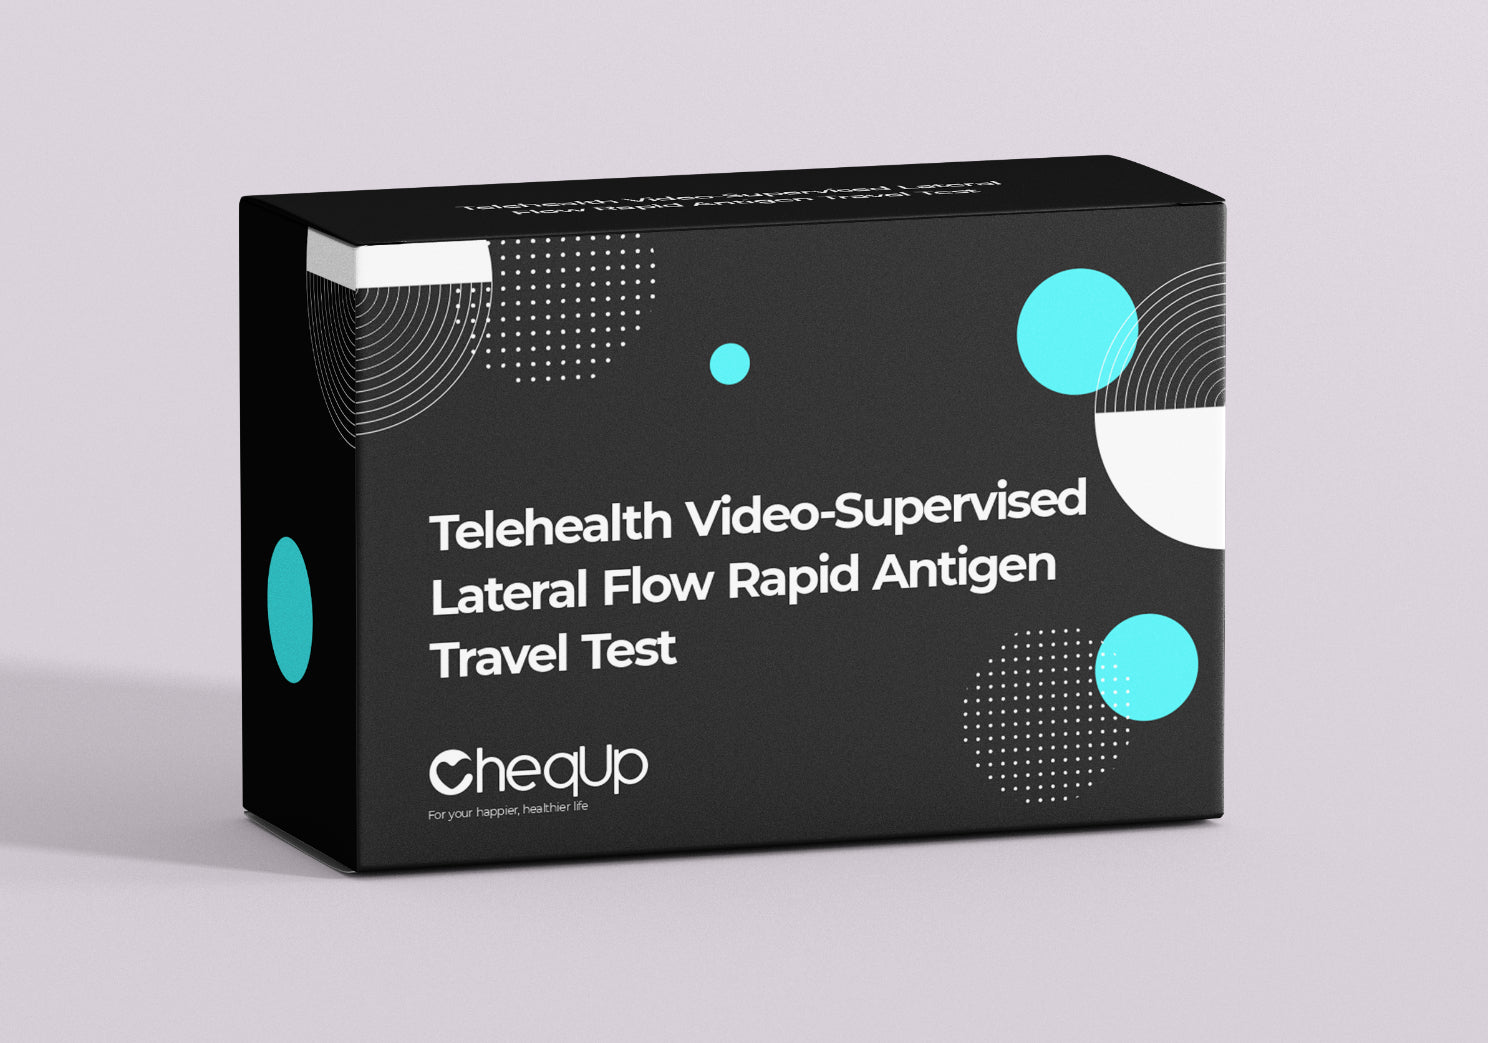 Telehealth Video-Supervised Lateral Flow Rapid Antigen Travel Test - With Travel Certificate